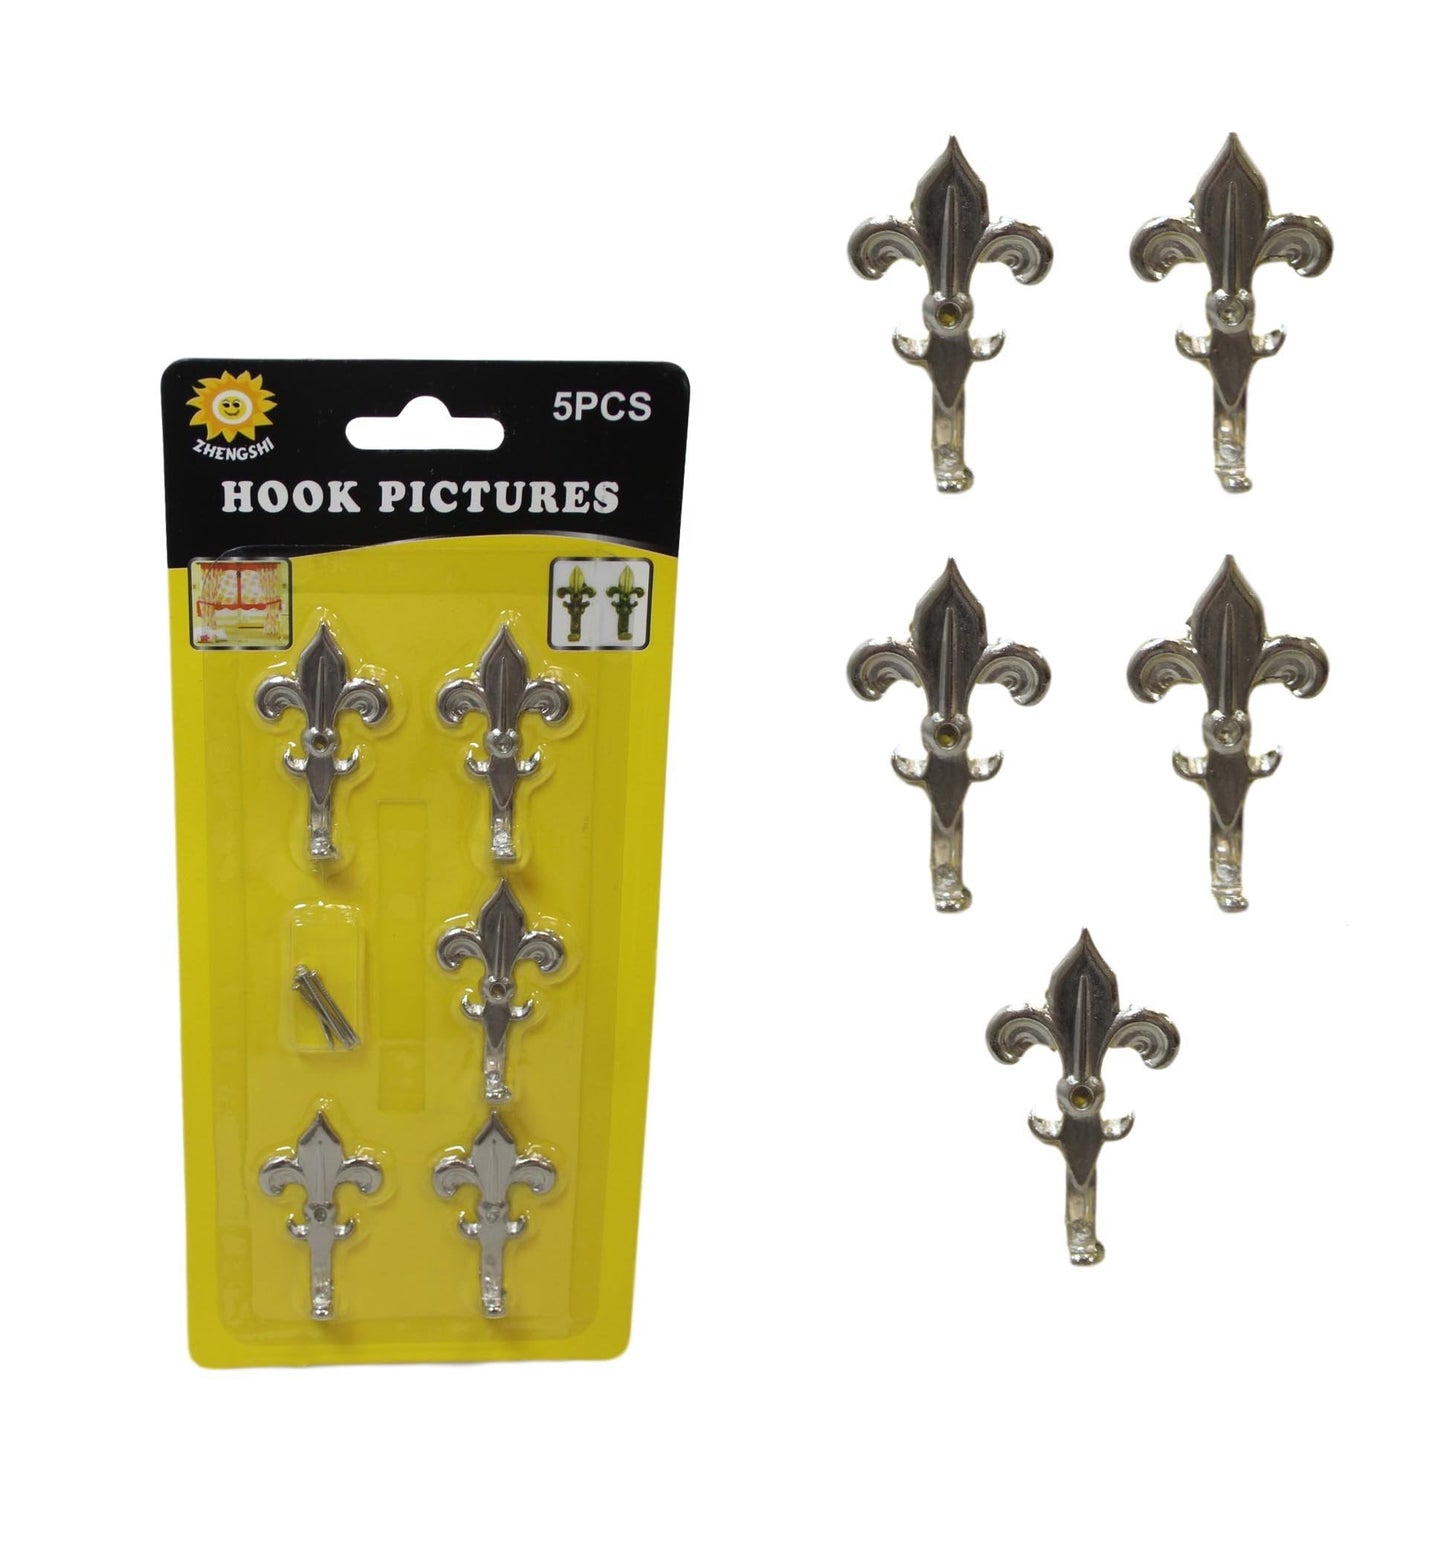 5 Pack Chrome Mini Picture Curtain Hooks With Nails 3cm 6002 (Large Letter Rate)